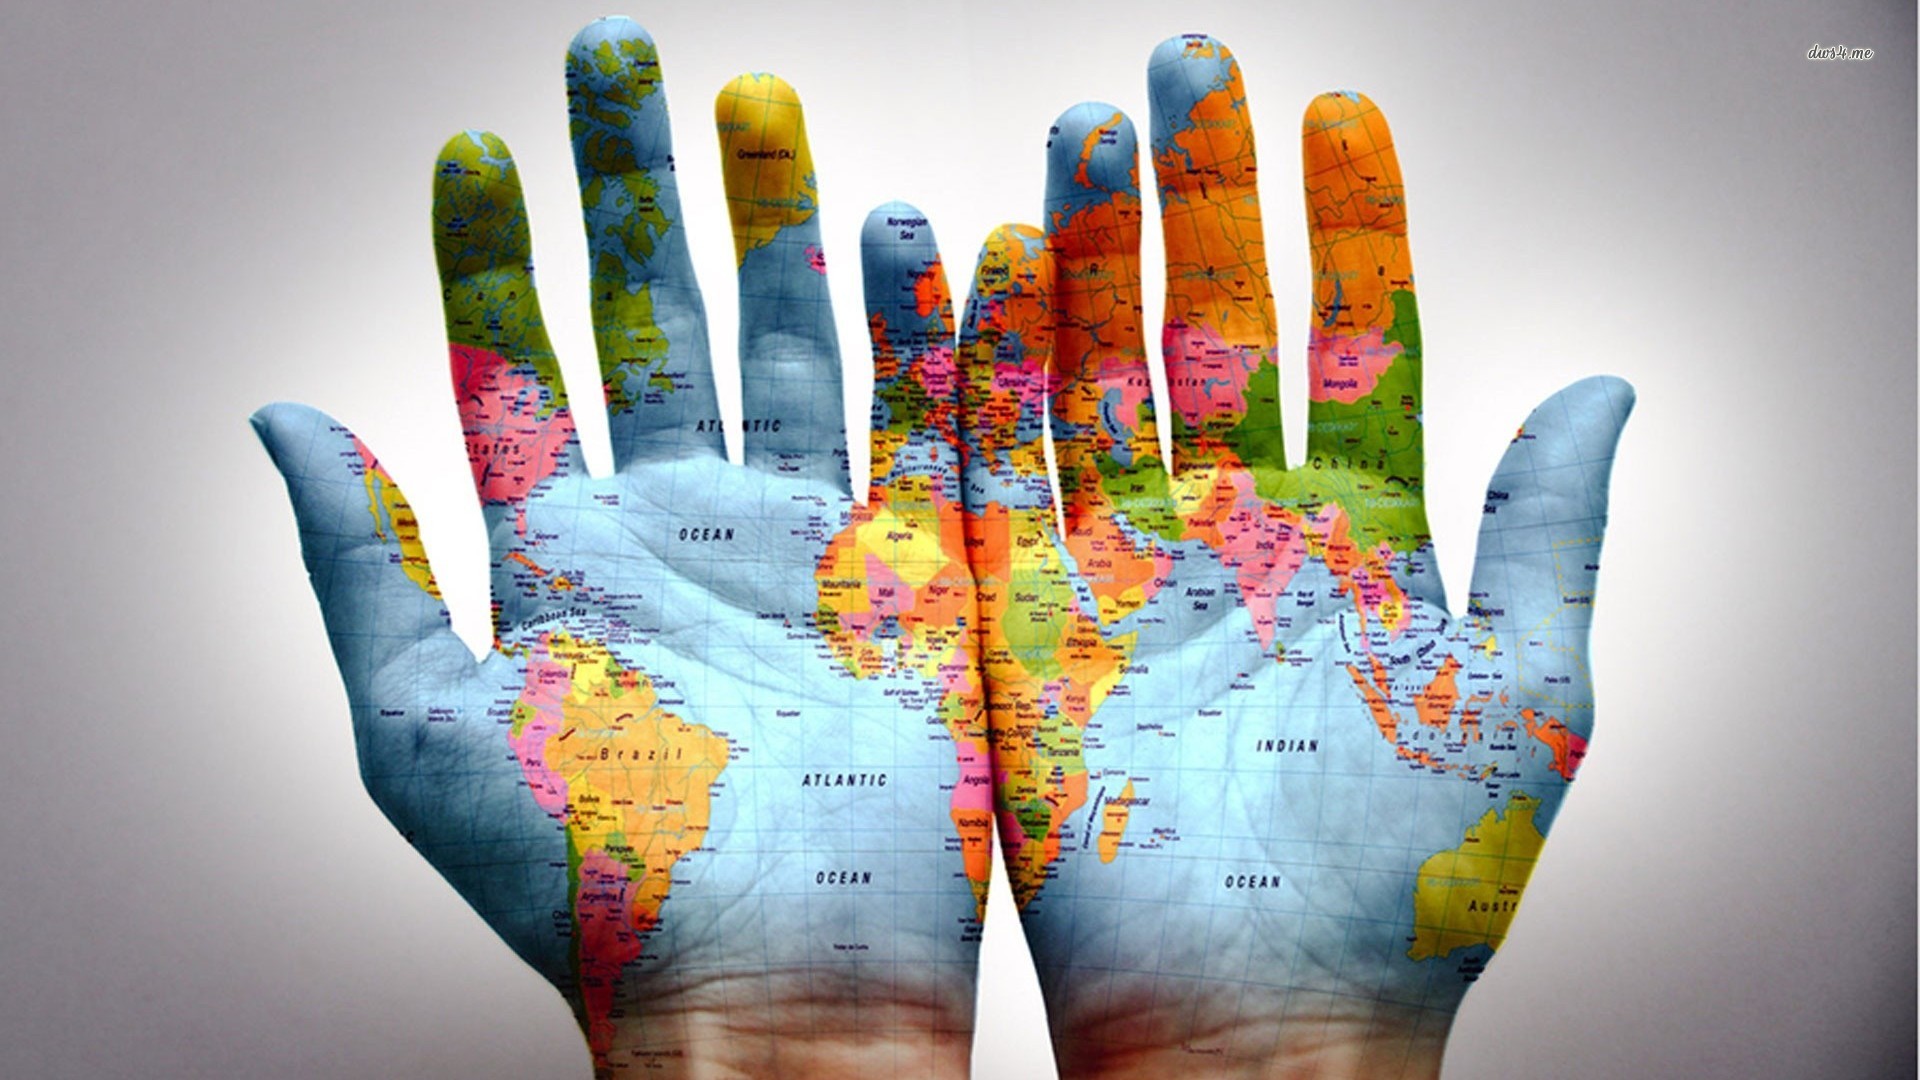 I got the whole world in my hands